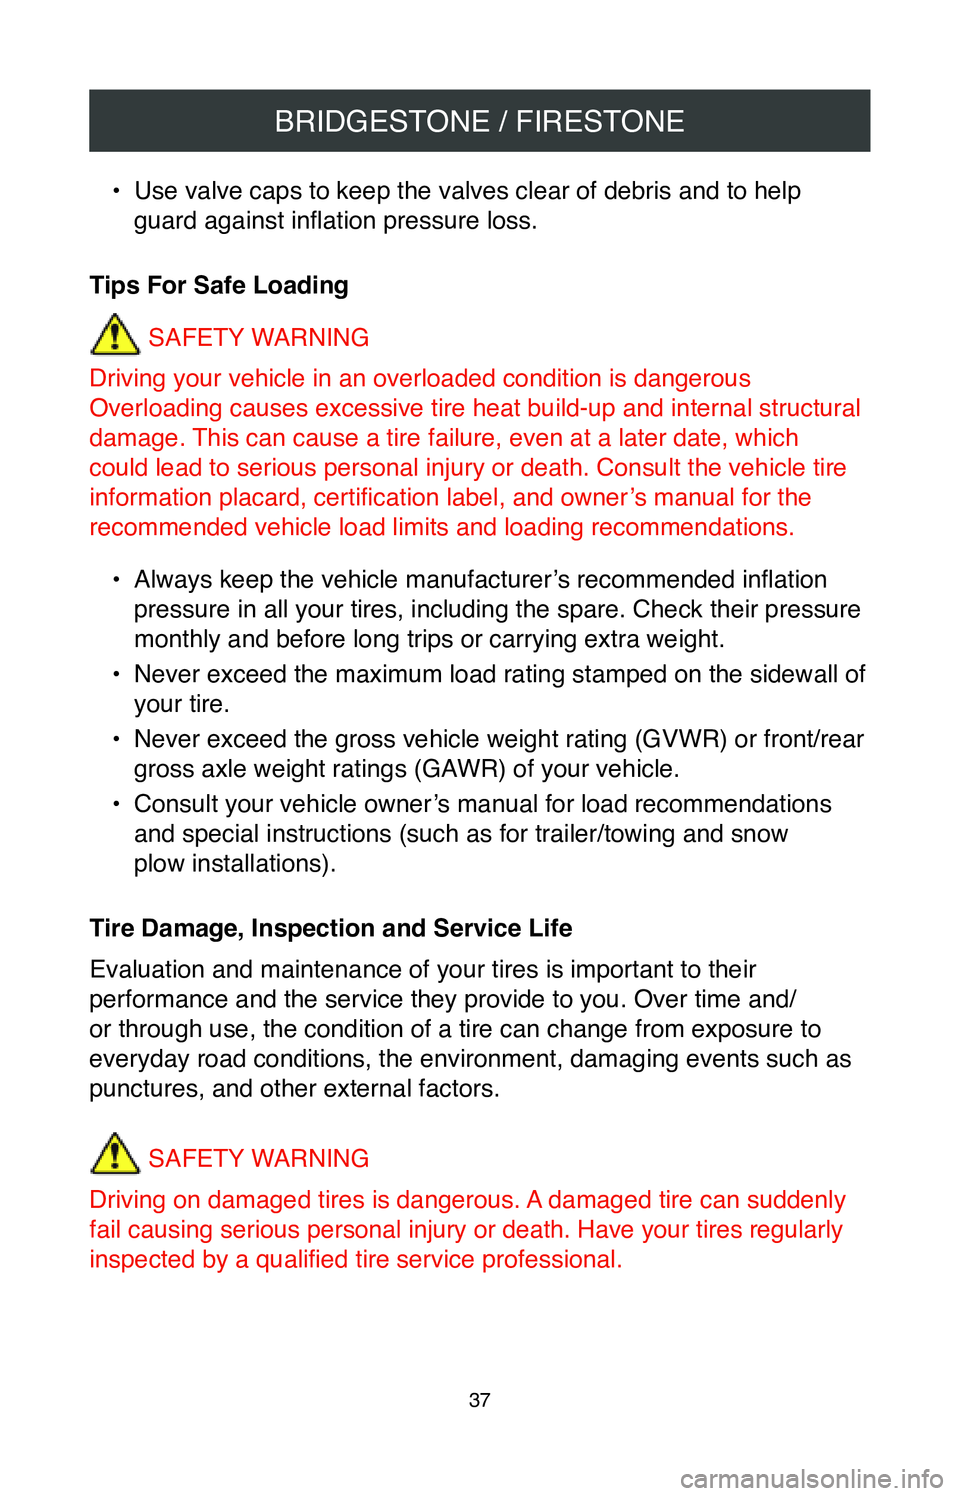 TOYOTA PRIUS 2020  Warranties & Maintenance Guides (in English) BRIDGESTONE / FIRESTONE
37
• Use valve caps to keep the valves clear of debris and to help 
guard against inflation pressure loss.
Tips For Safe Loading SAFETY WARNING
Driving your vehicle in an ove